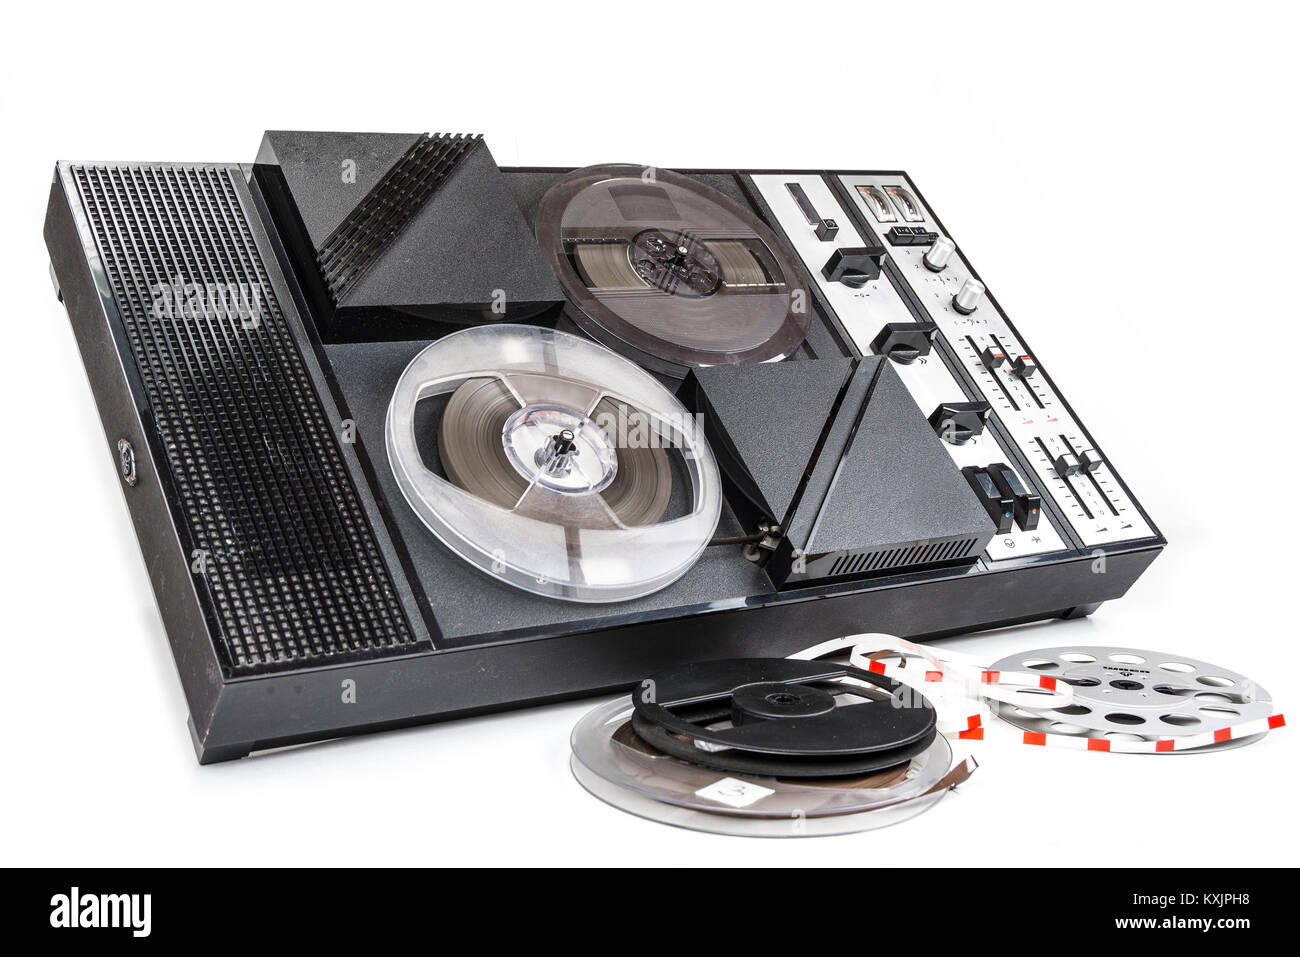 https://c8.alamy.com/comp/KXJPH8/old-audio-magnetic-tape-recorder-reel-to-reel-from-seventies-KXJPH8.jpg